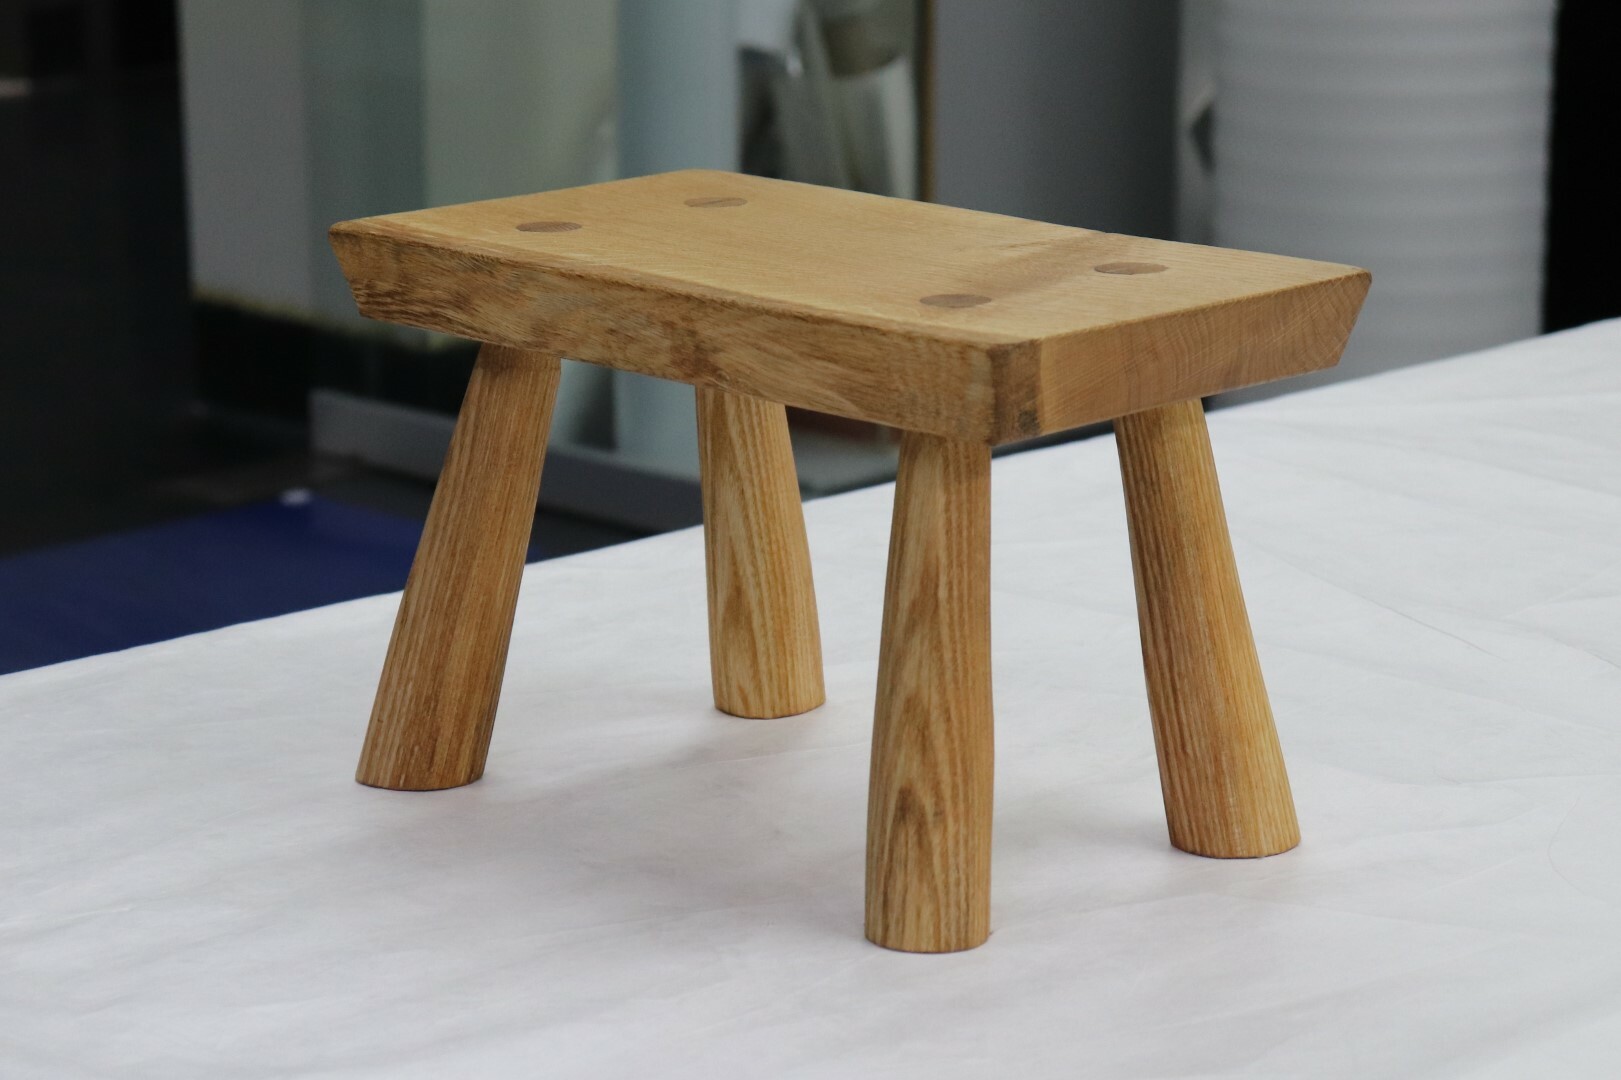 The stool made by Greg Quinn. The legs are made from an ash tree felled in Hagley Park, and the top is from an oak at Lincoln University.